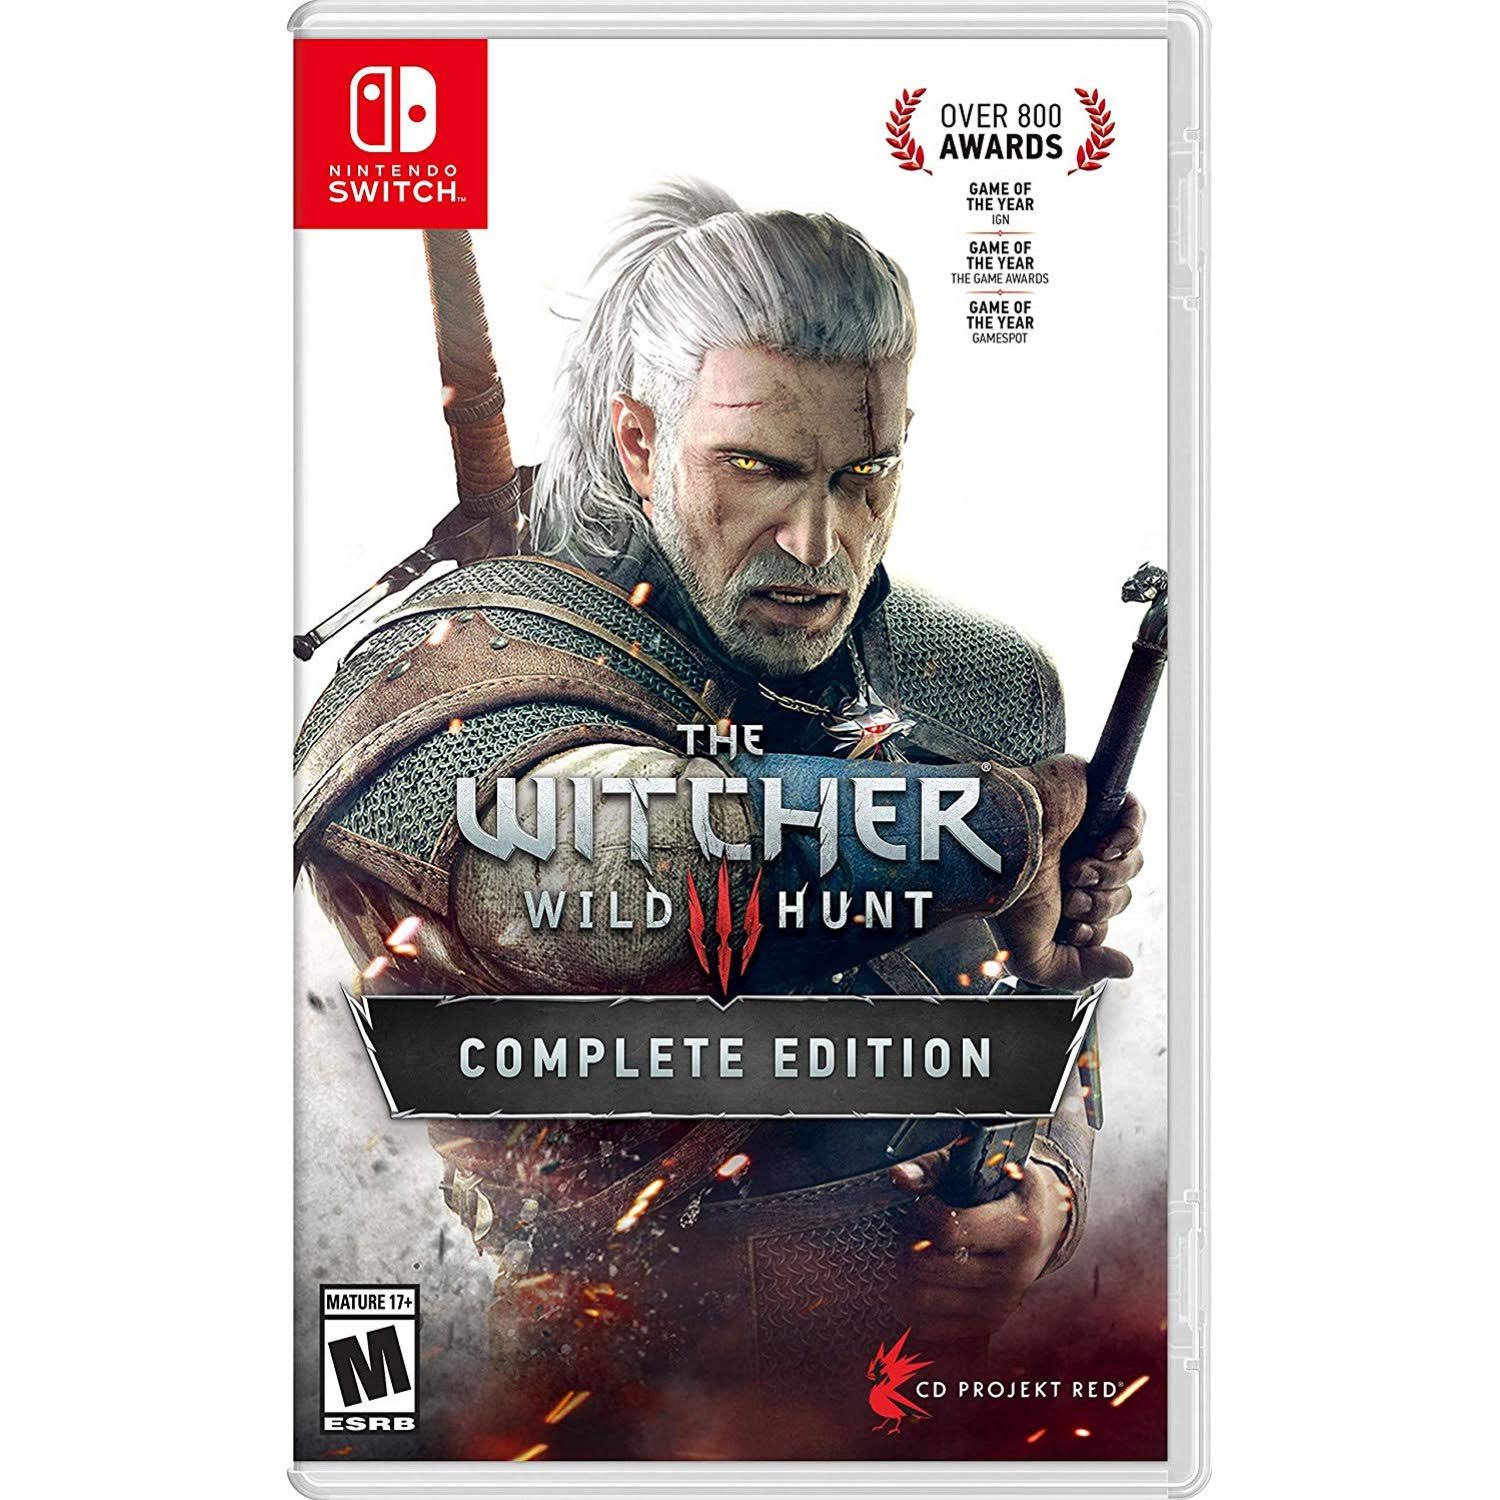 Witcher 3: Wild Hunt Complete Edition Nintendo Switch Game (NTSC)